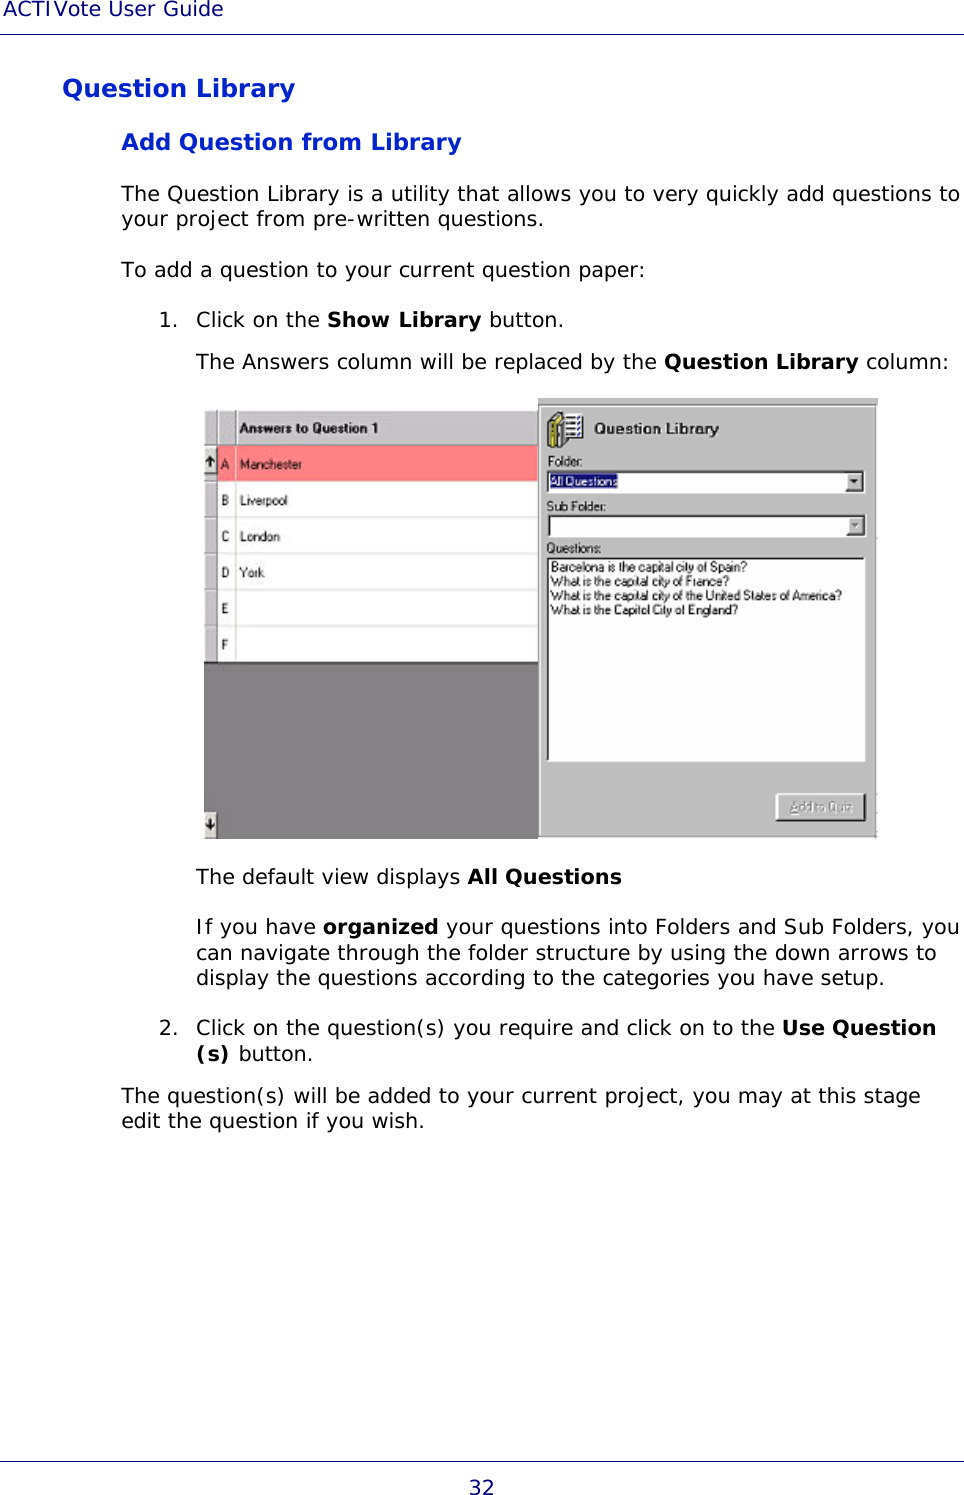 ACTIVote User Guide 32 Question Library Add Question from Library The Question Library is a utility that allows you to very quickly add questions to your project from pre-written questions. To add a question to your current question paper: 1. Click on the Show Library button. The Answers column will be replaced by the Question Library column:  The default view displays All Questions If you have organized your questions into Folders and Sub Folders, you can navigate through the folder structure by using the down arrows to display the questions according to the categories you have setup. 2. Click on the question(s) you require and click on to the Use Question (s) button. The question(s) will be added to your current project, you may at this stage edit the question if you wish. 